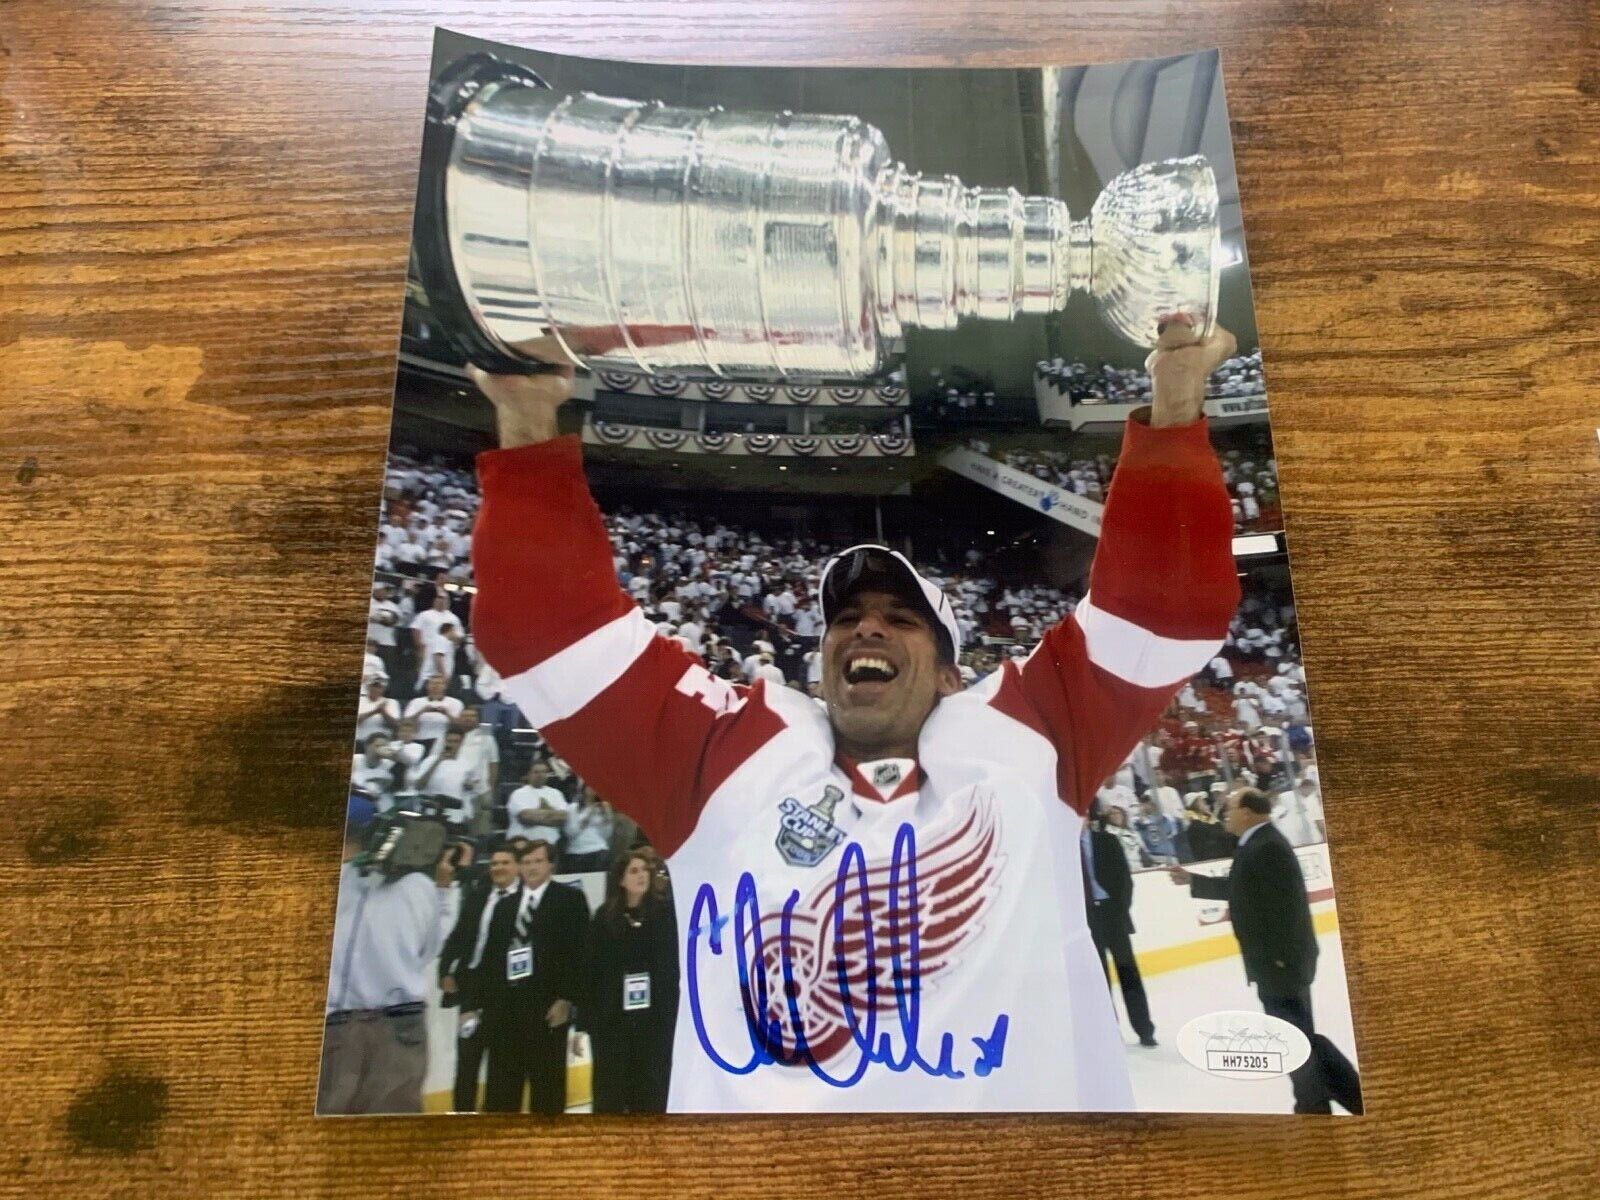 Chris Chelios Red Wings Stanley Cup Autographed 8x10 Photo JSA COA HH75205